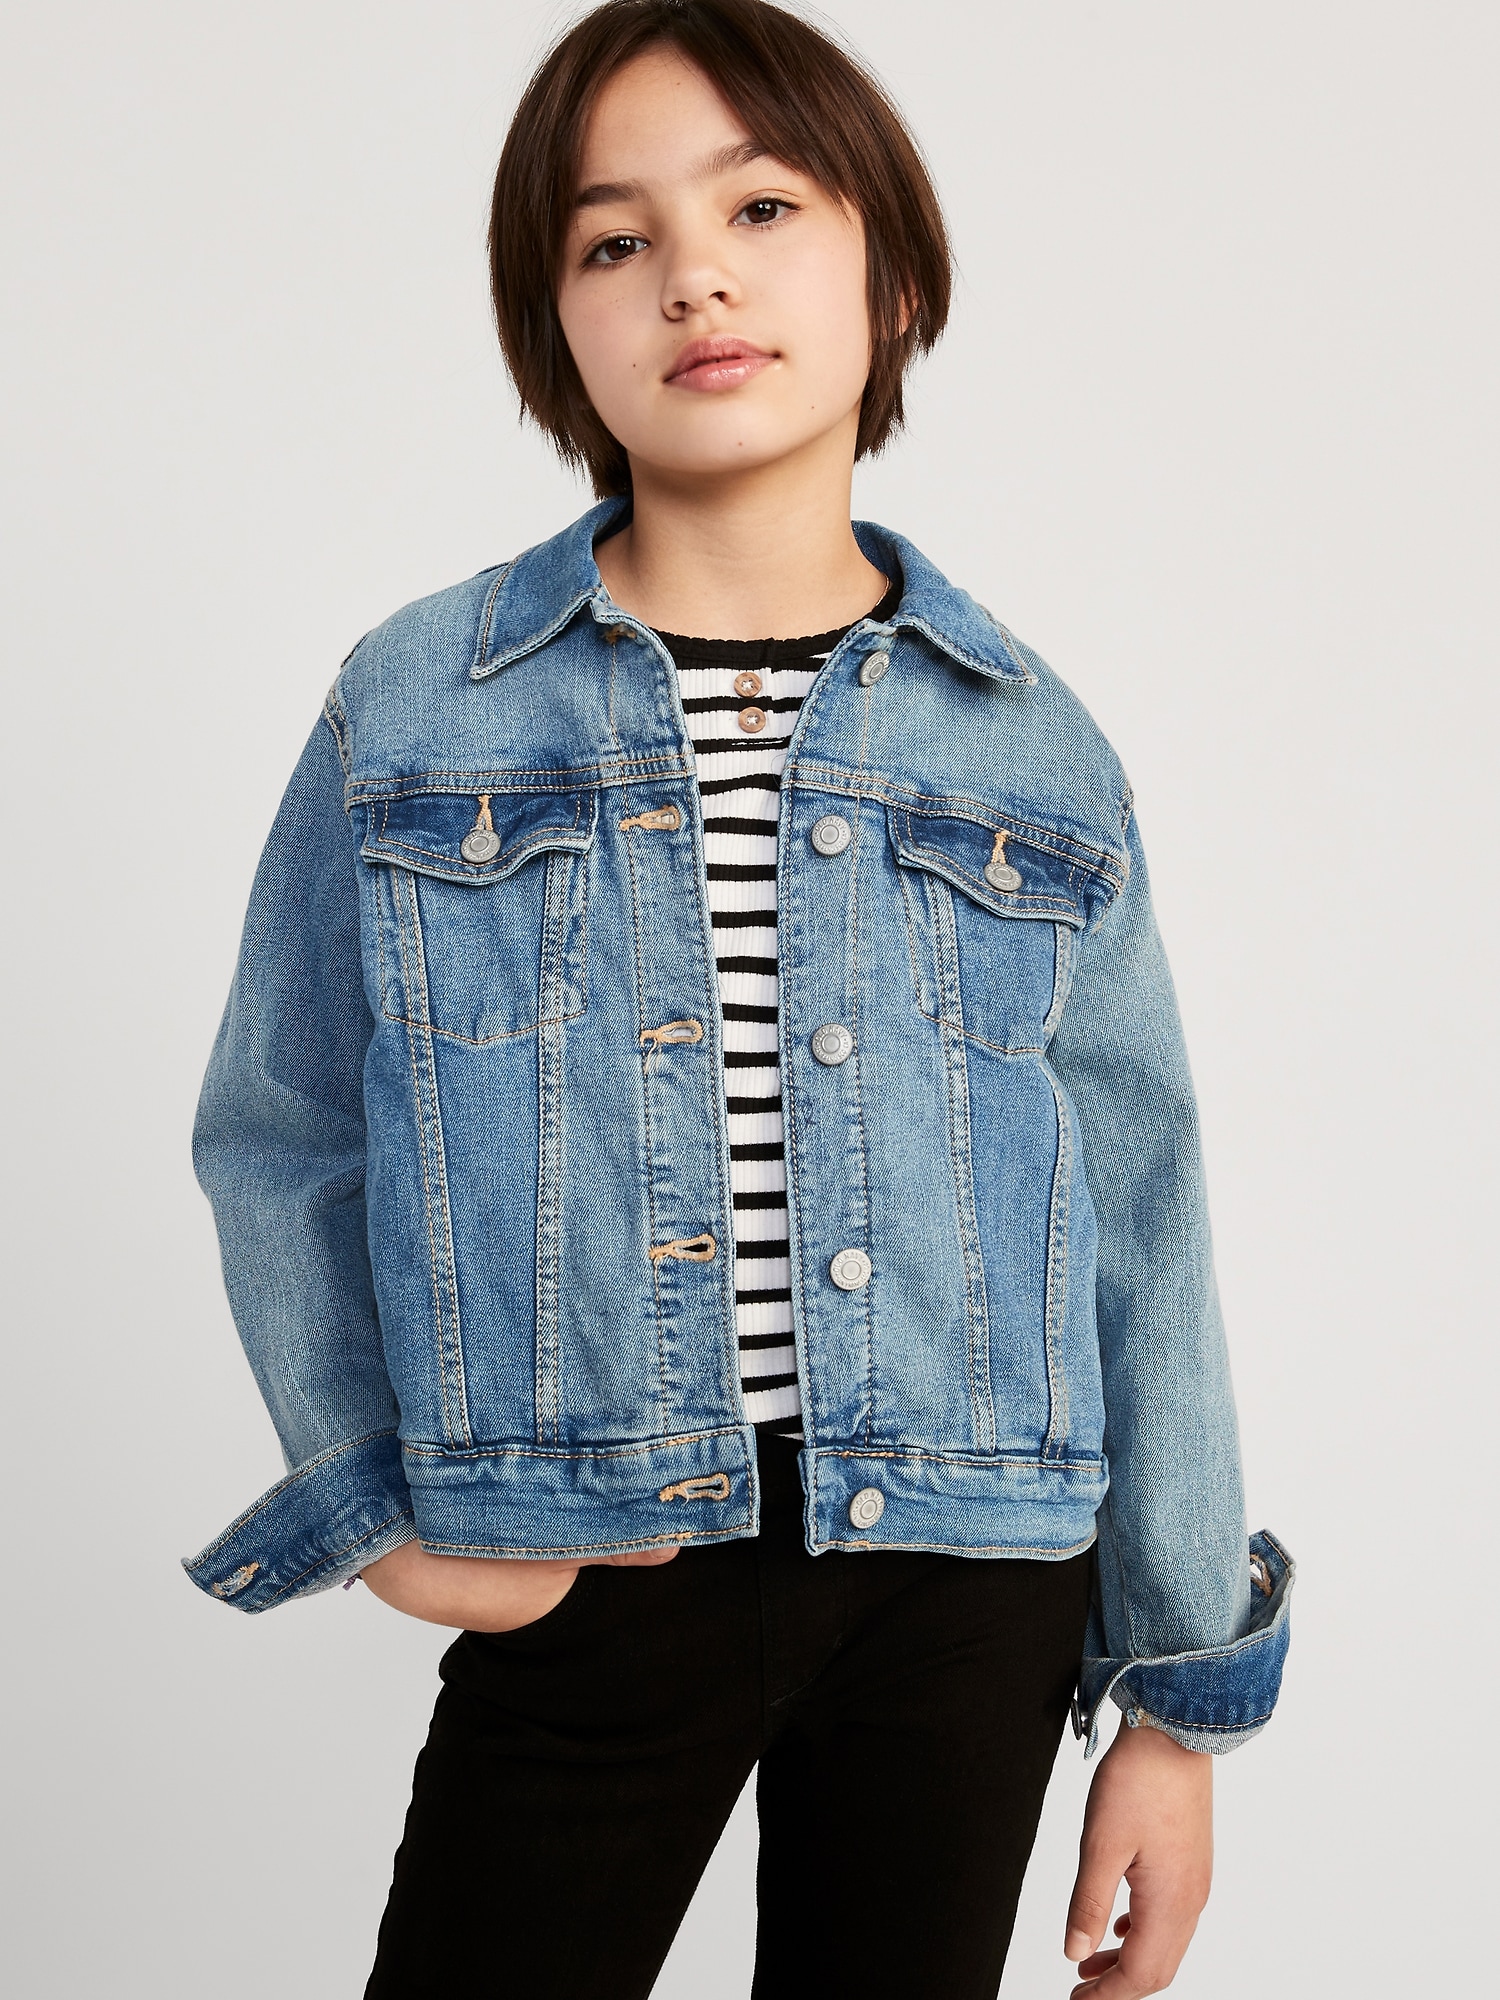 Fashionable Girls Jean Jacket For Comfort And Style - Alibaba.com-saigonsouth.com.vn